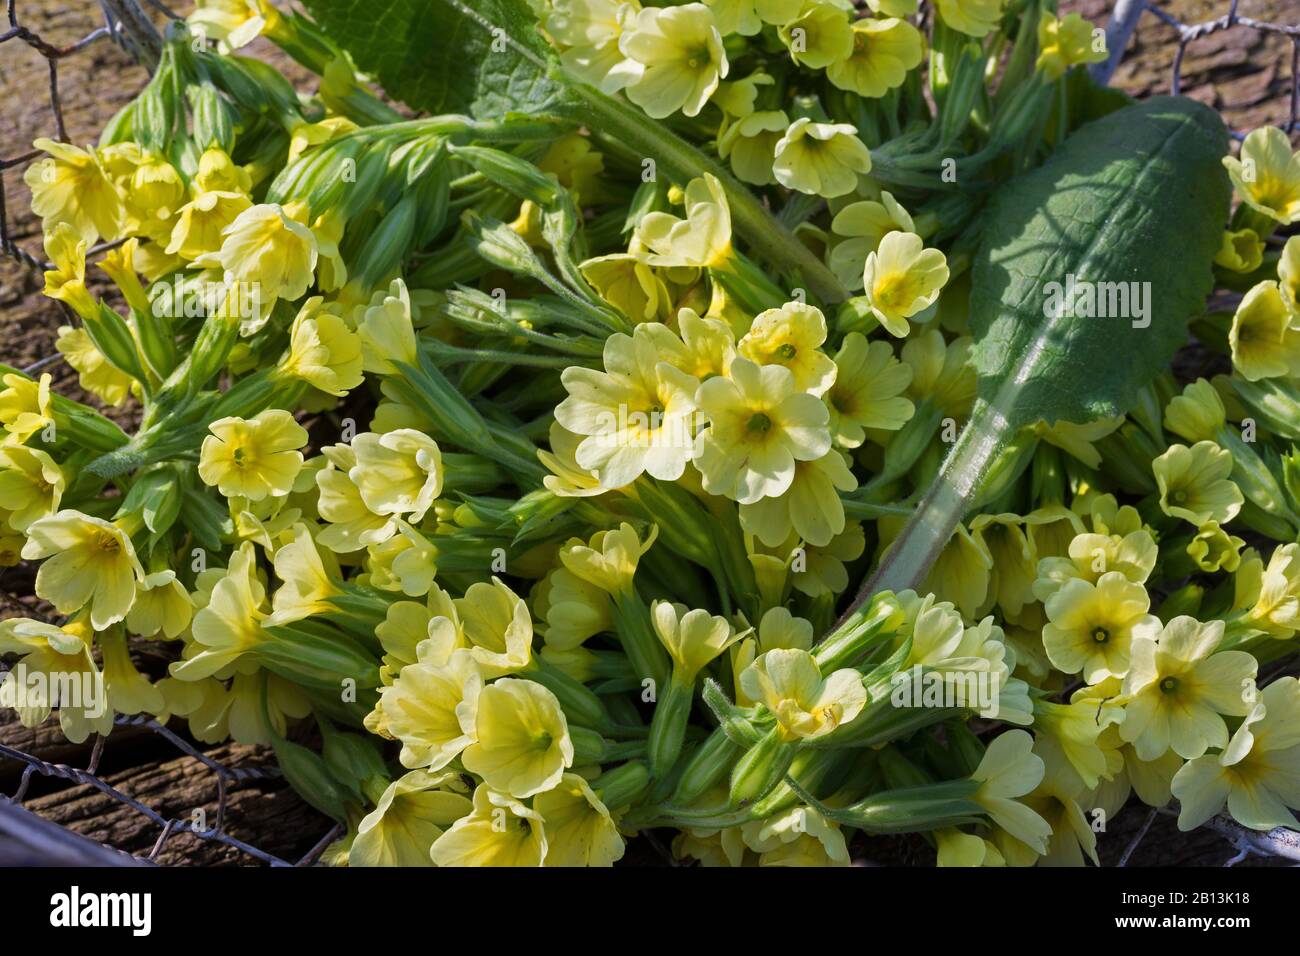 True oxlip (Primula elatior), collected flowers, Germany Stock Photo